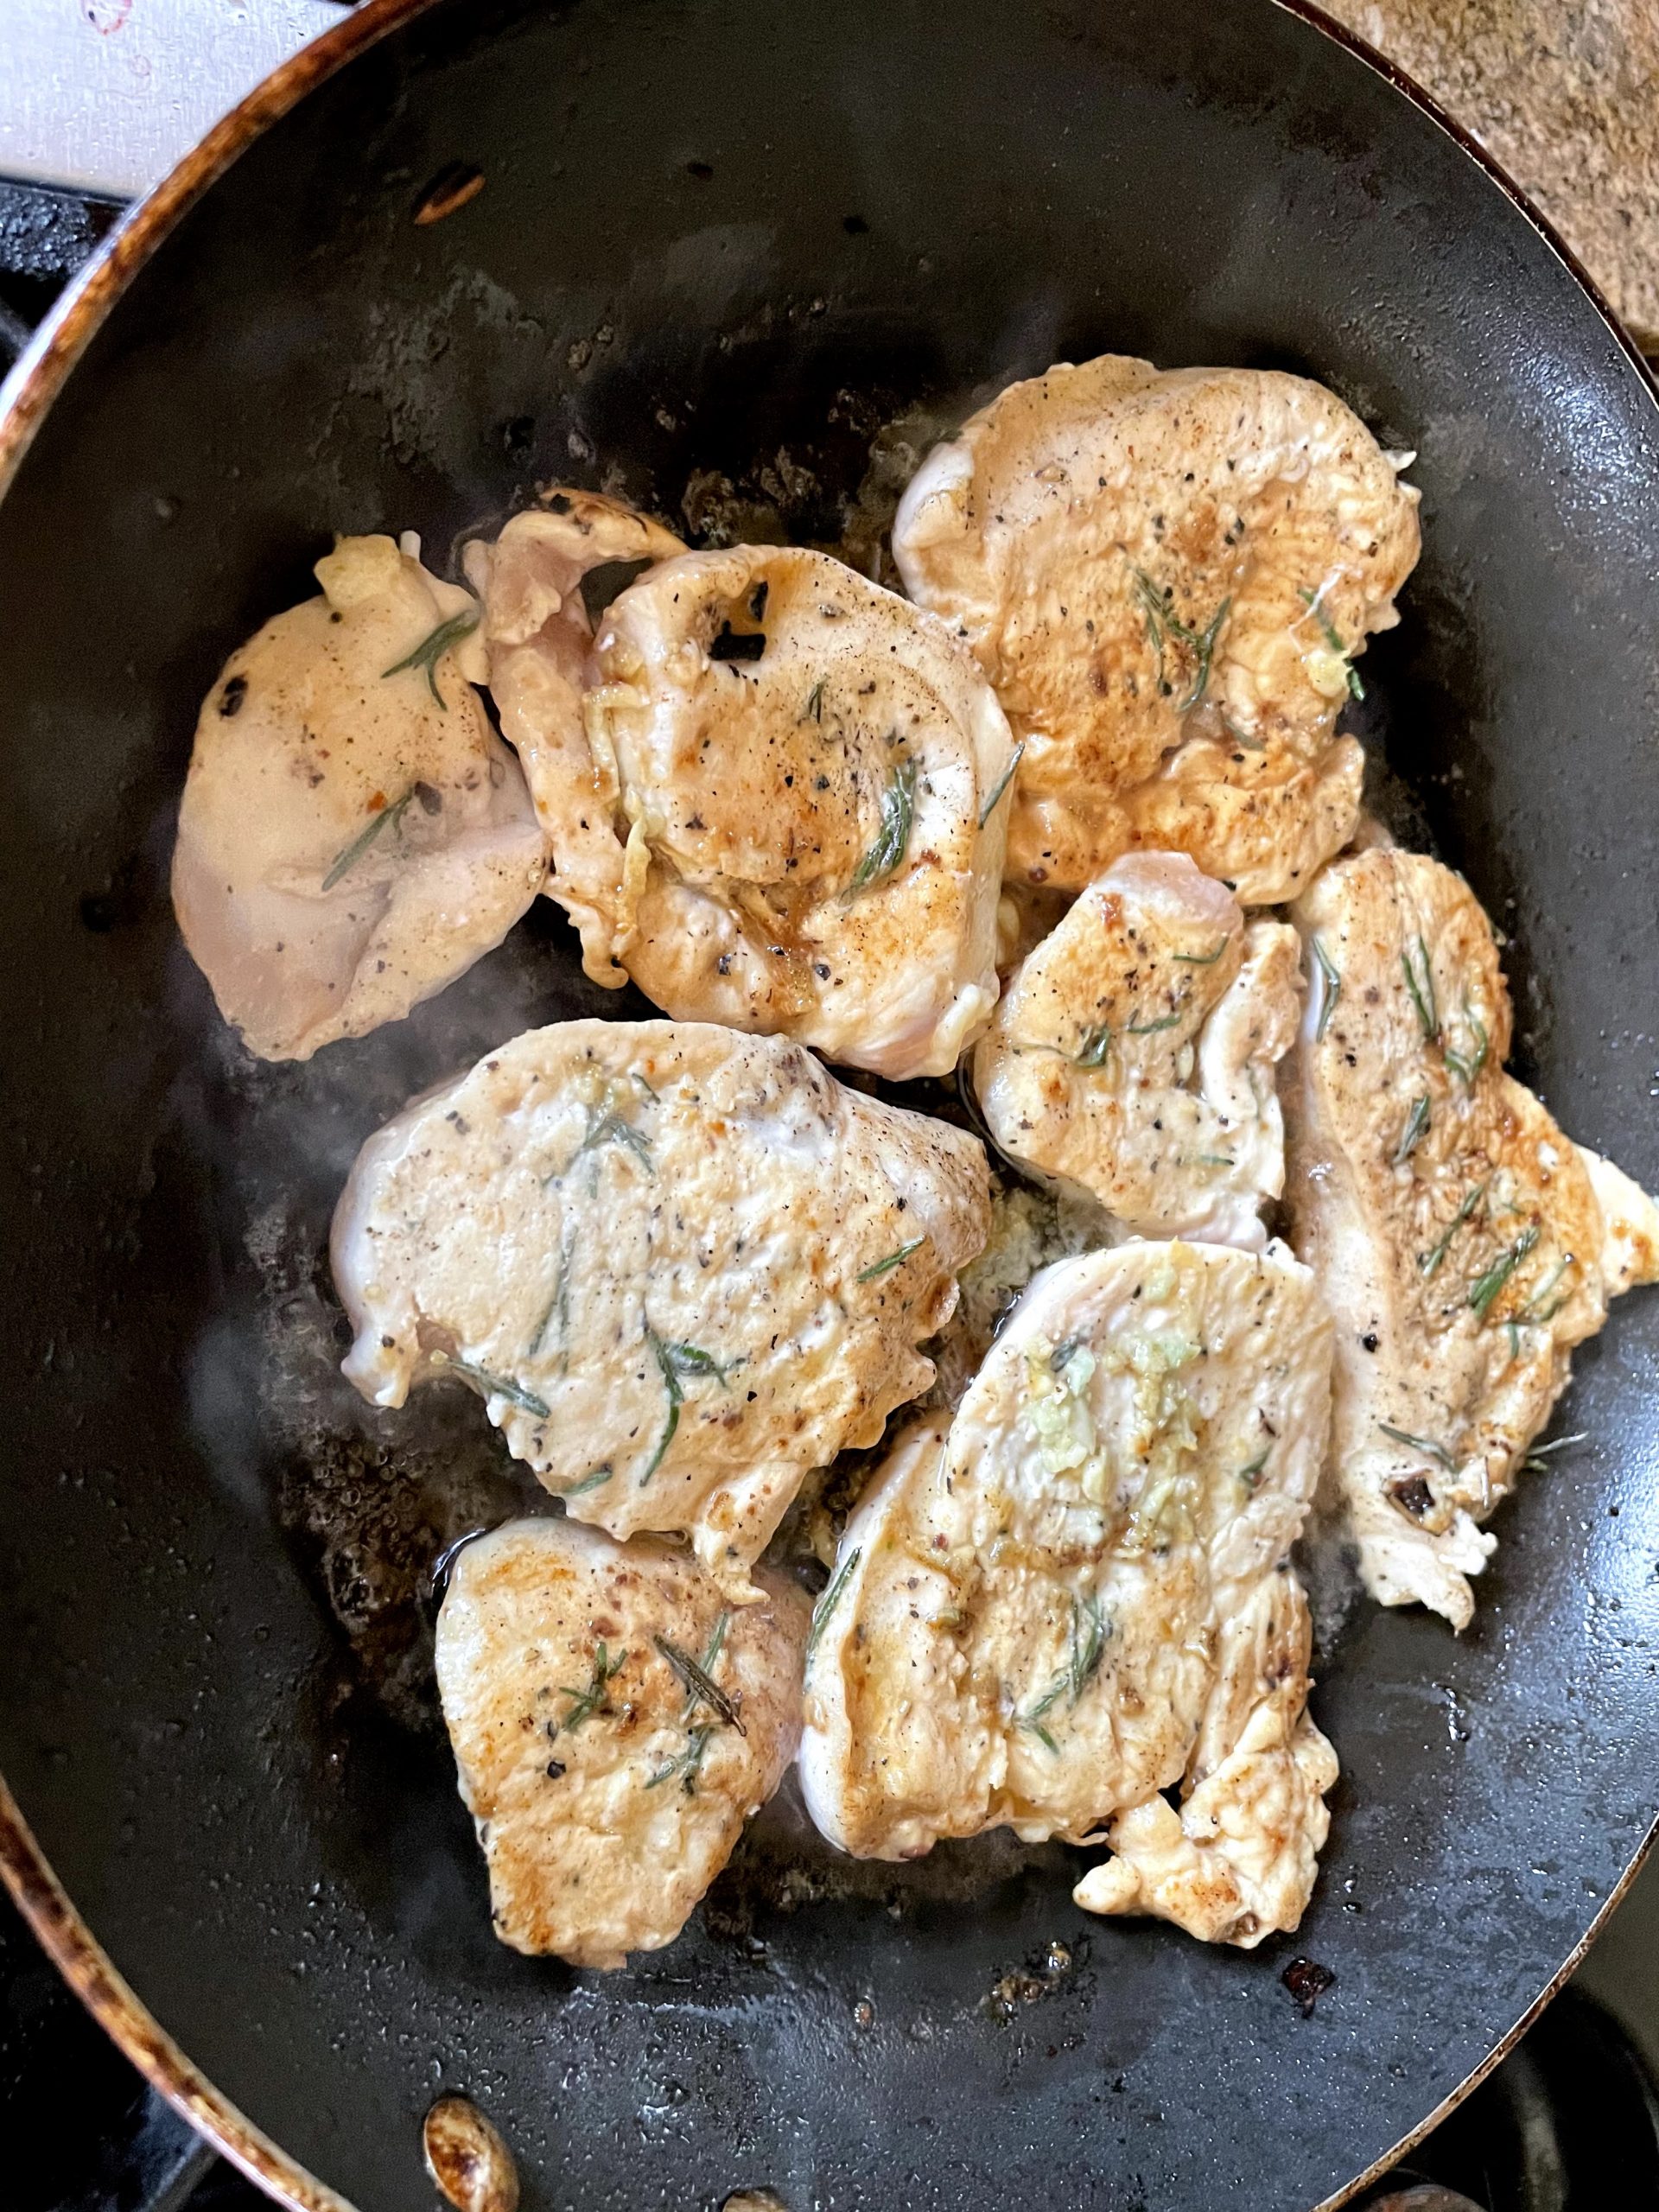 Frying the cutlets in a olive oil, butter mixture.